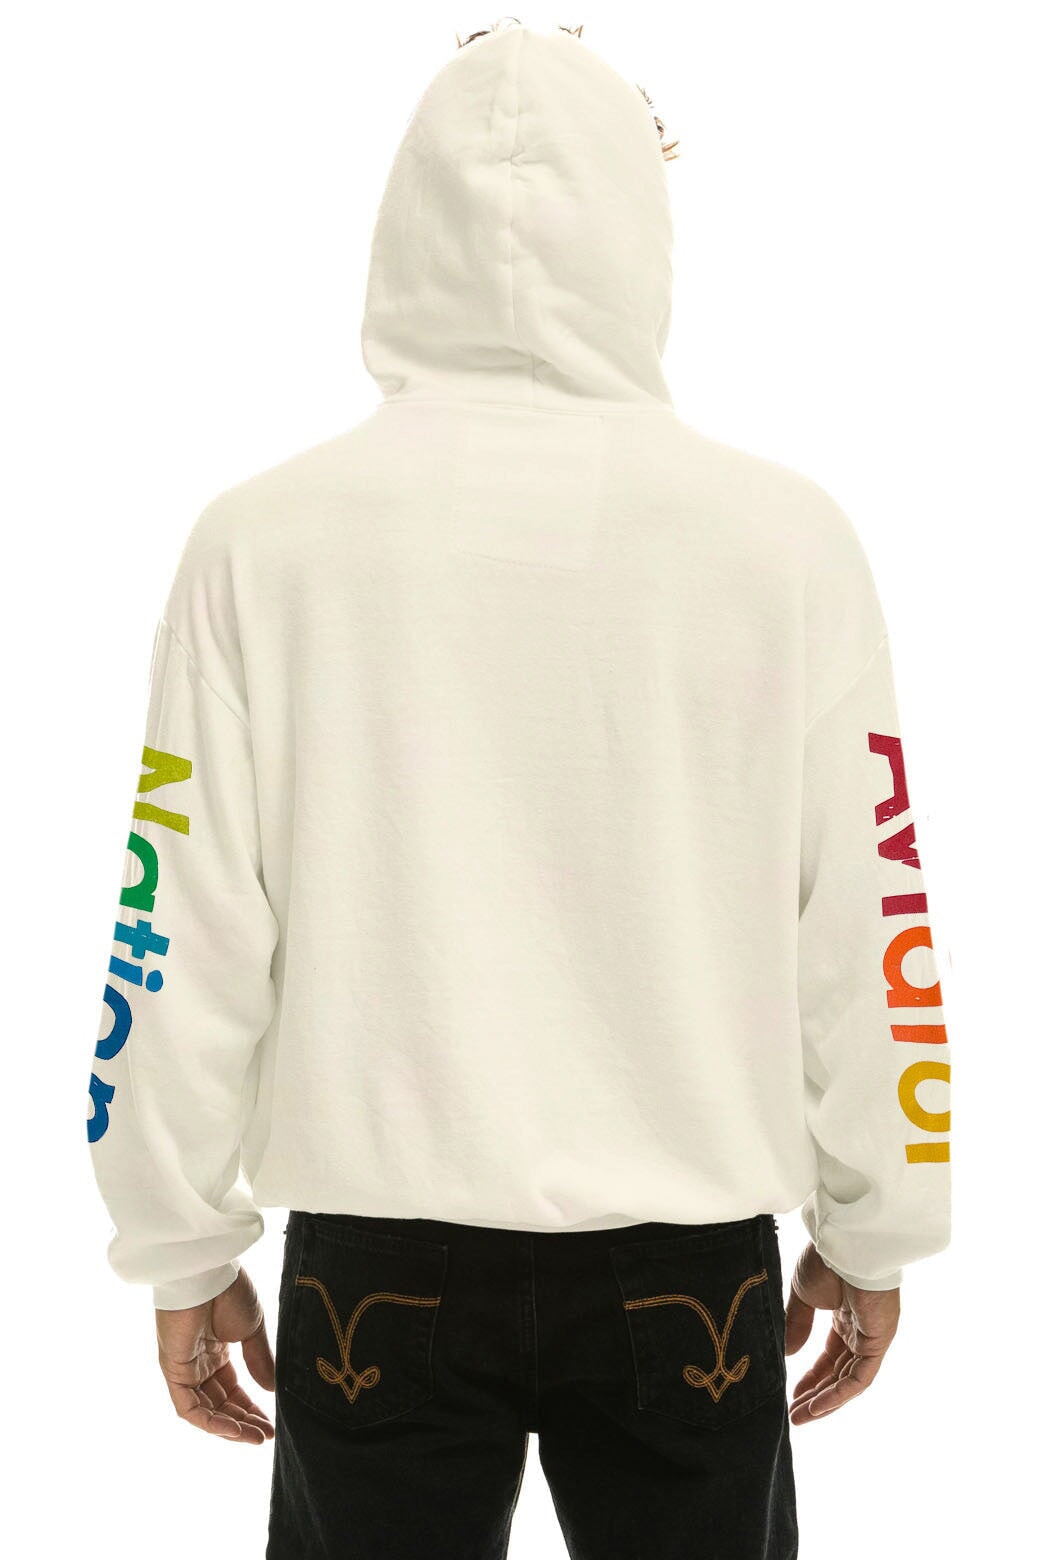 AVIATOR NATION HAMPTONS RELAXED PULLOVER HOODIE - VINTAGE WHITE Hoodie Aviator Nation 